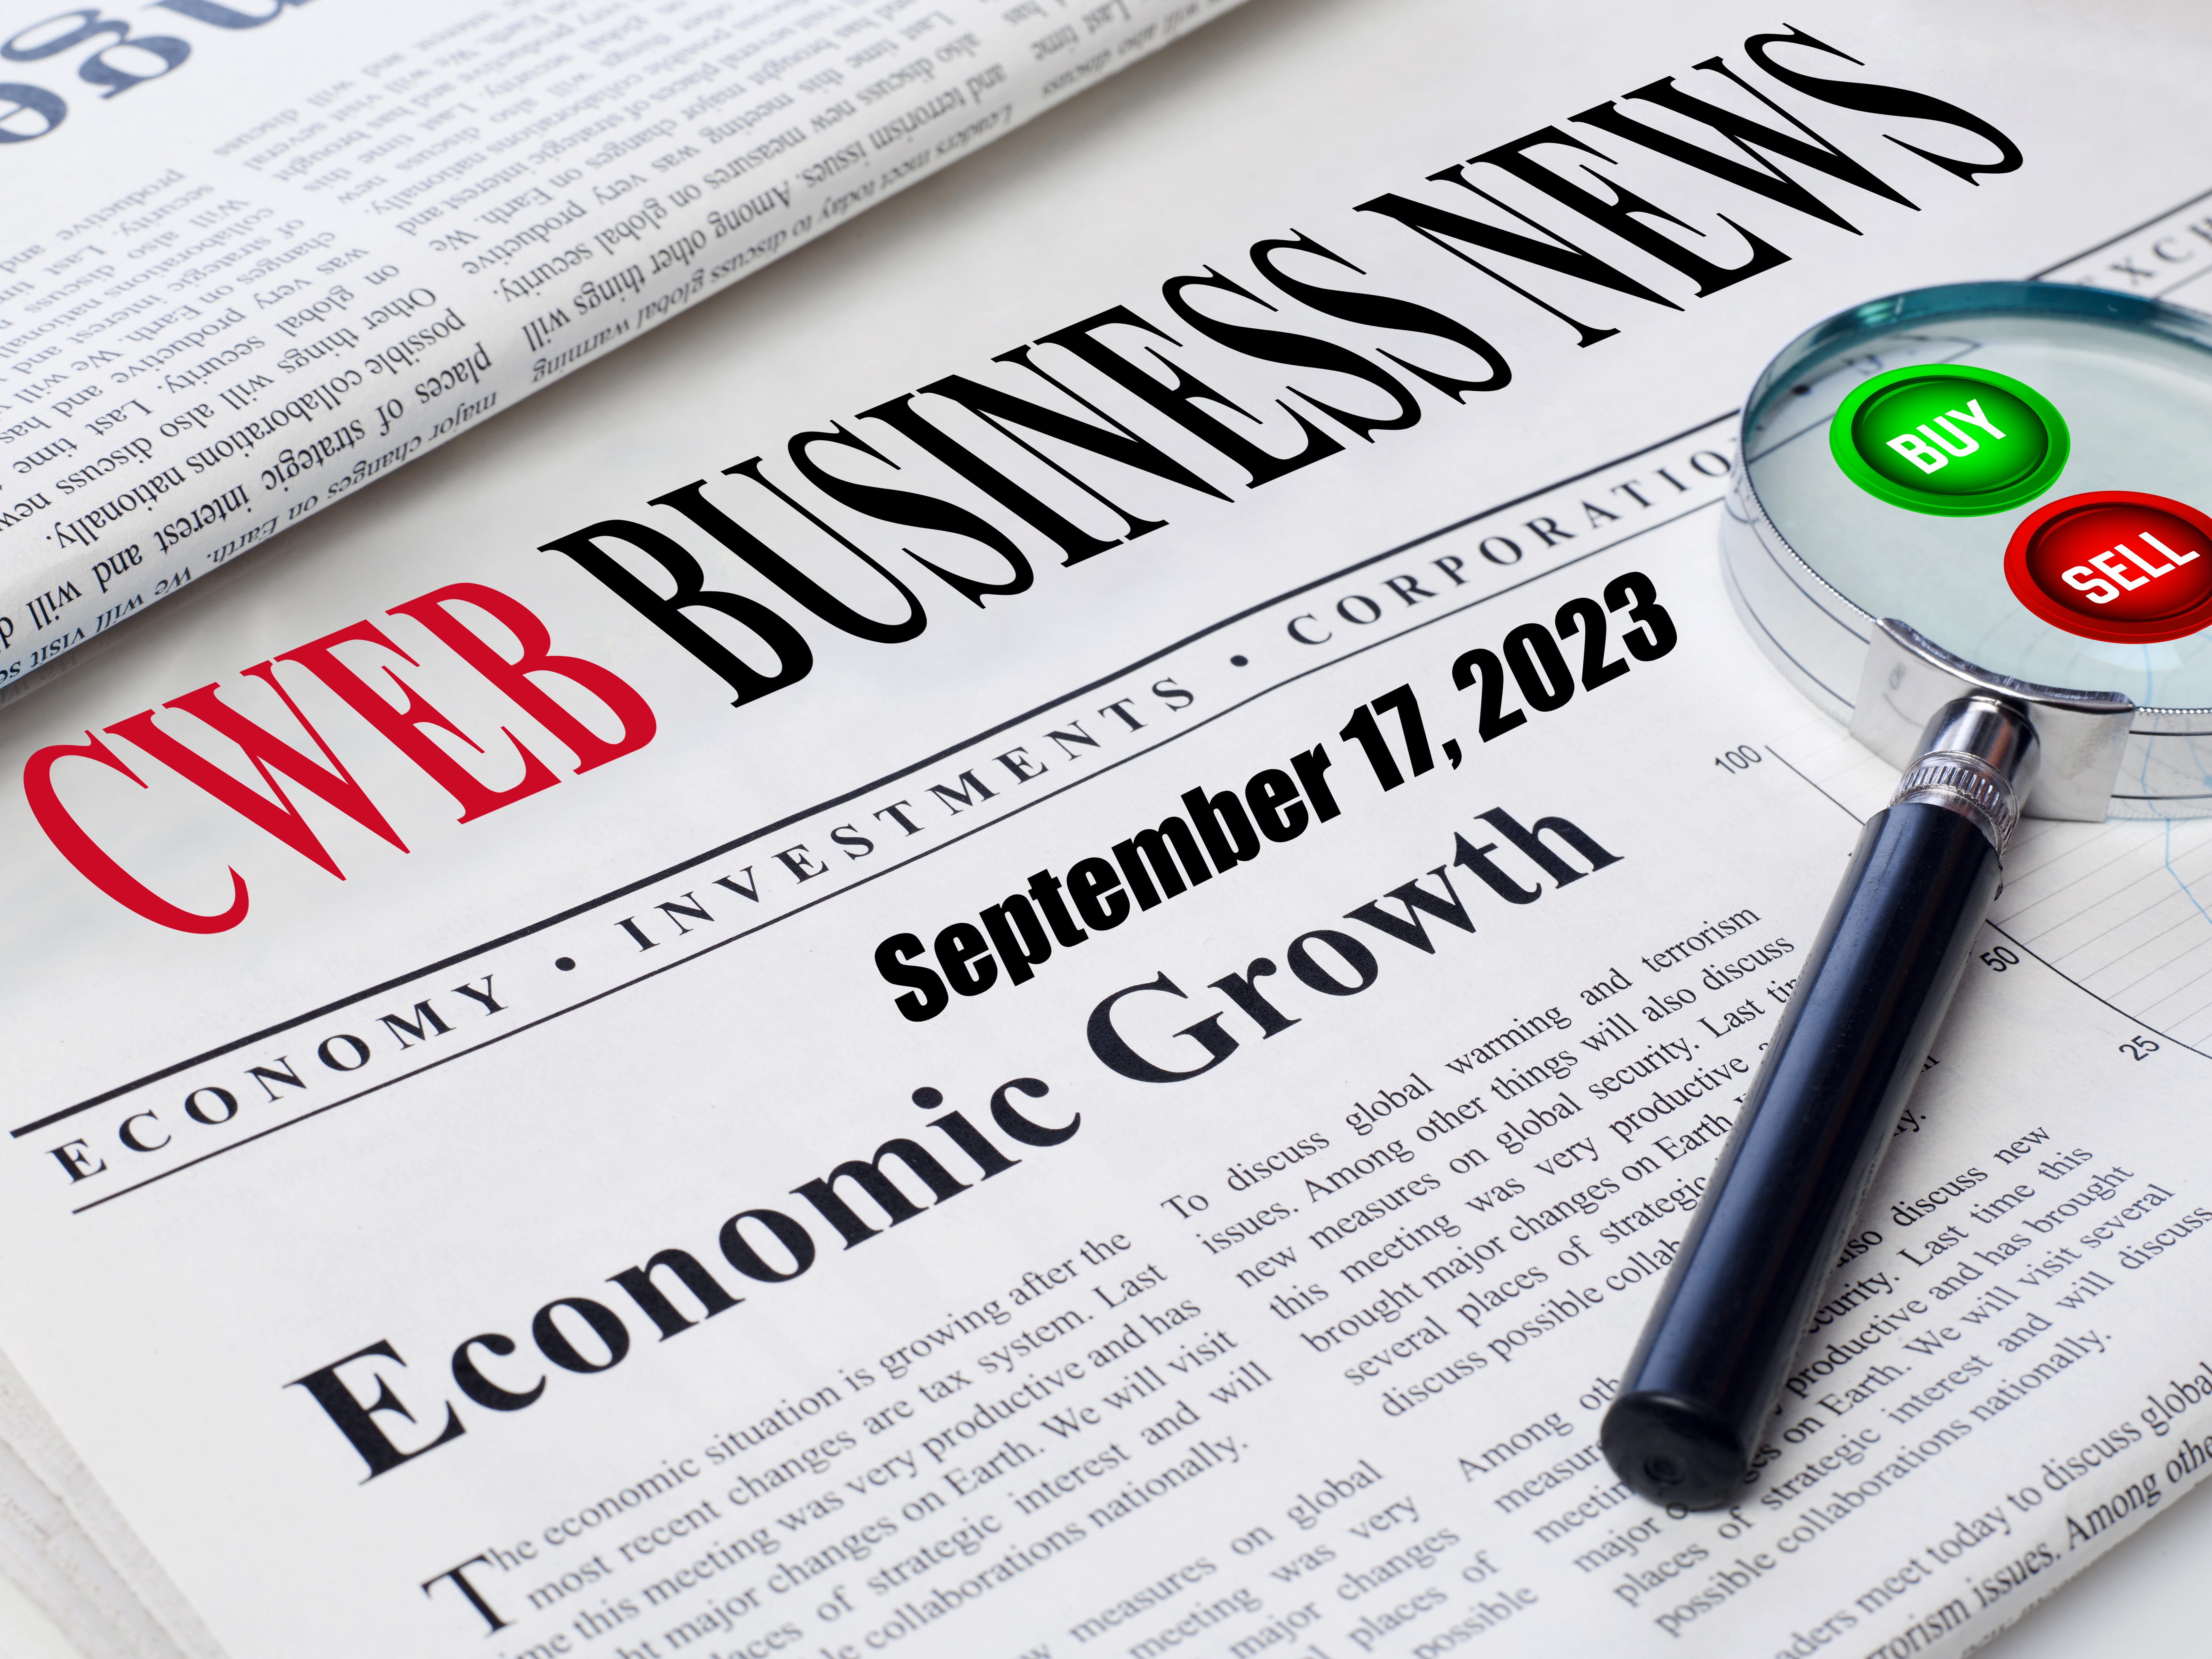 CWEB Publishes Roundup of Business and Trending News Highlights that Matter the Most - October 12, 2023